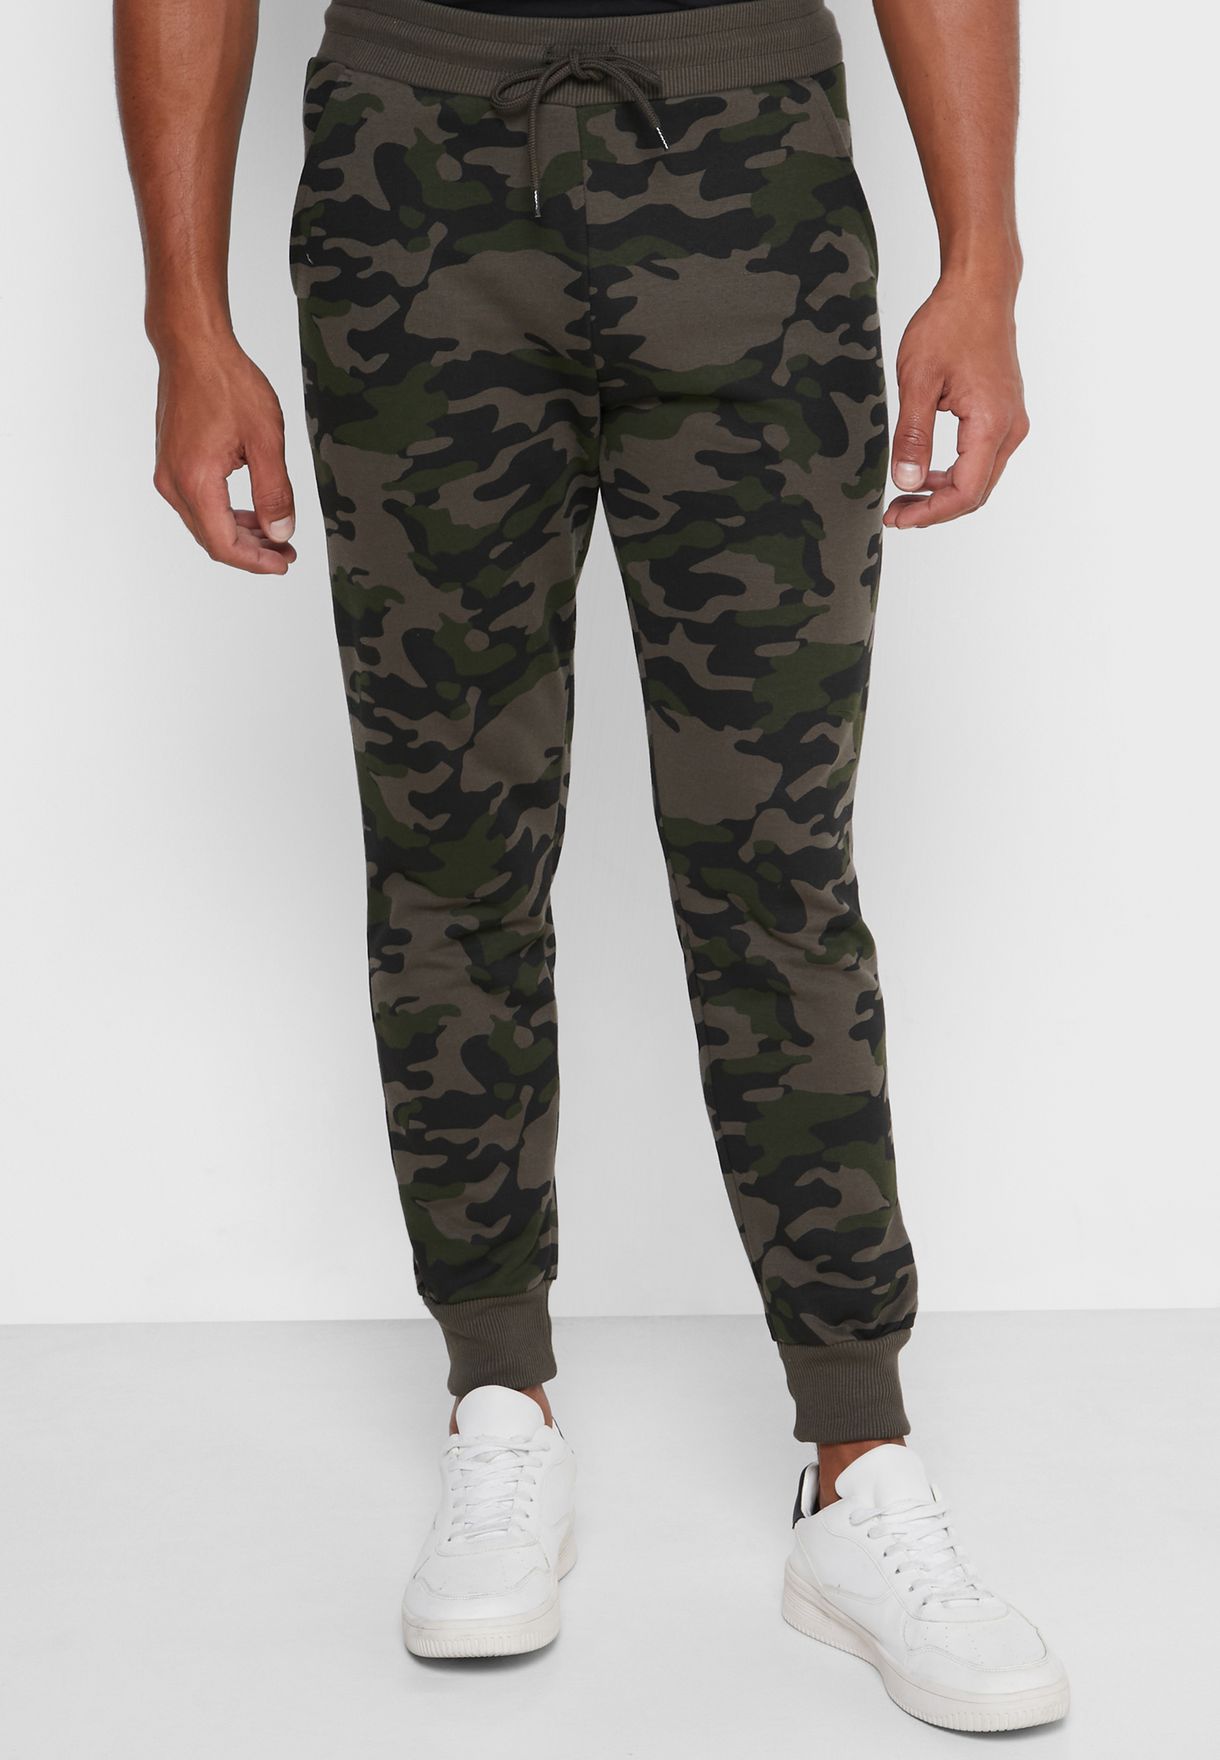 3 Pack Essential Joggers